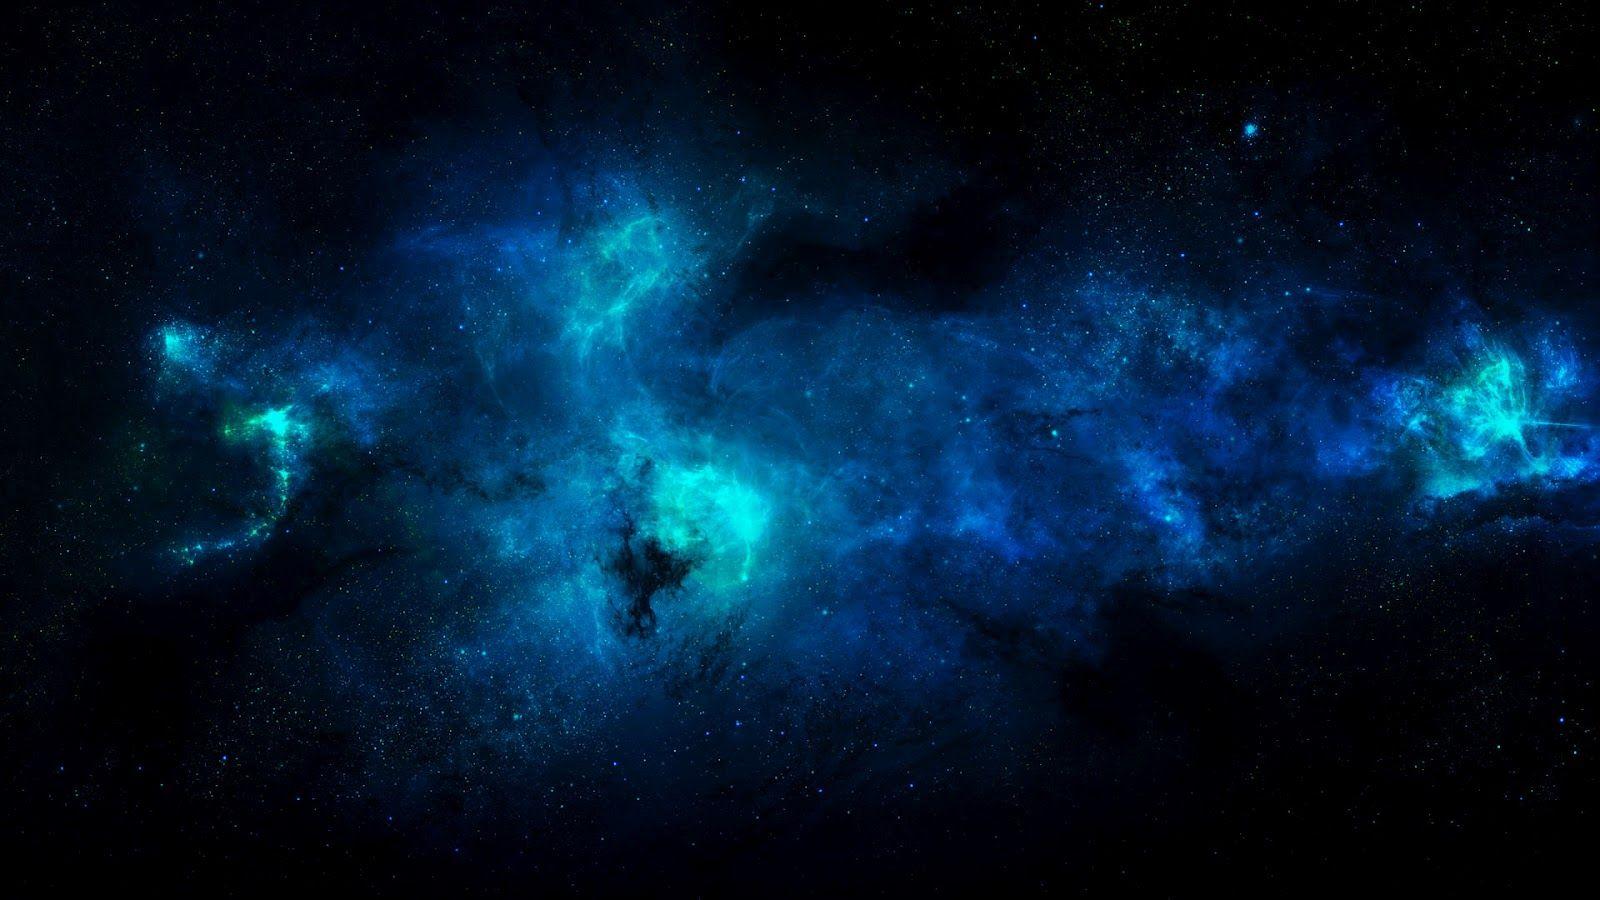 Amazing Cosmic Wallpaper for PC. Full HD Picture